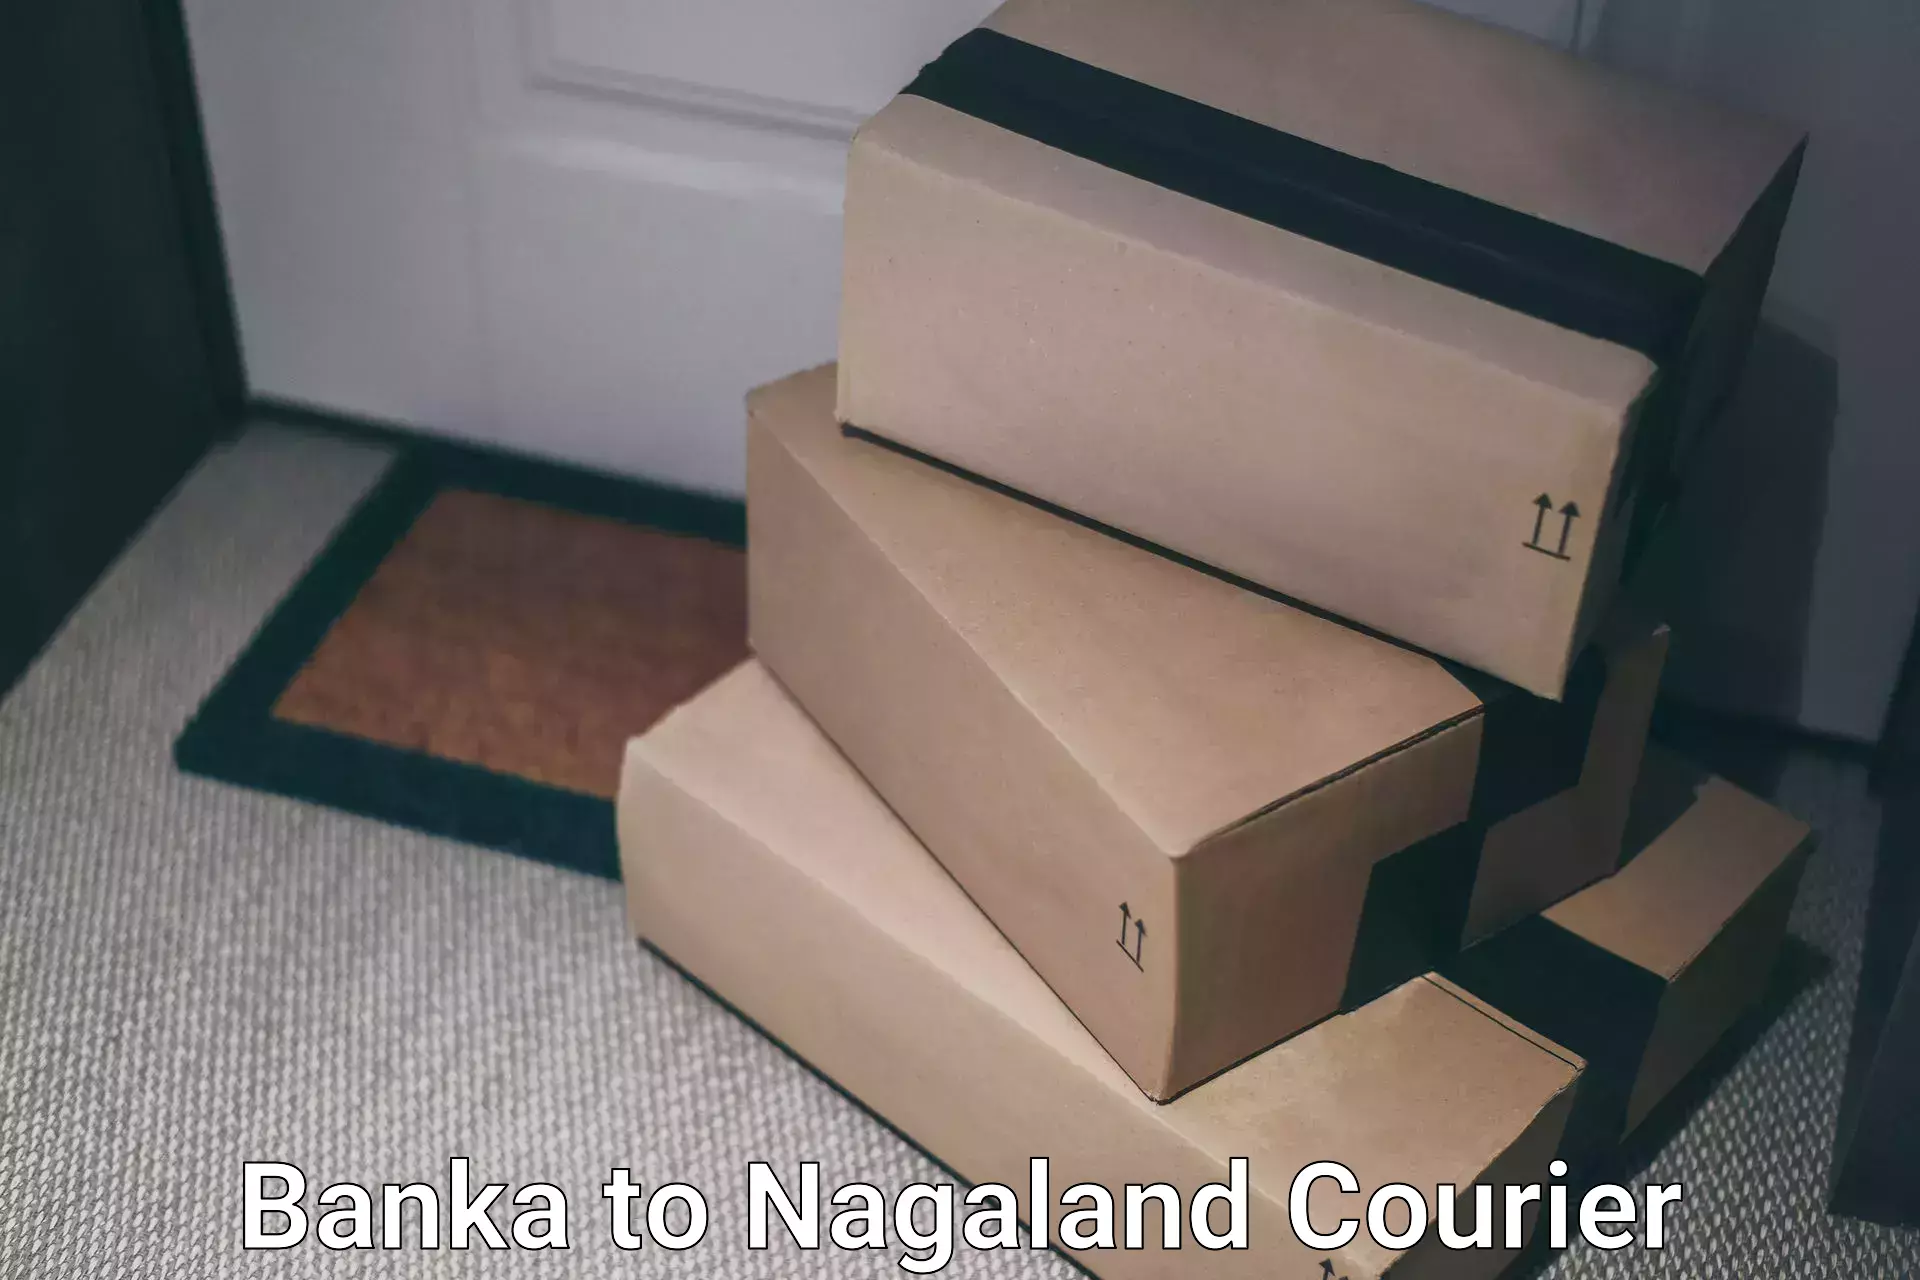 Professional courier handling in Banka to Nagaland